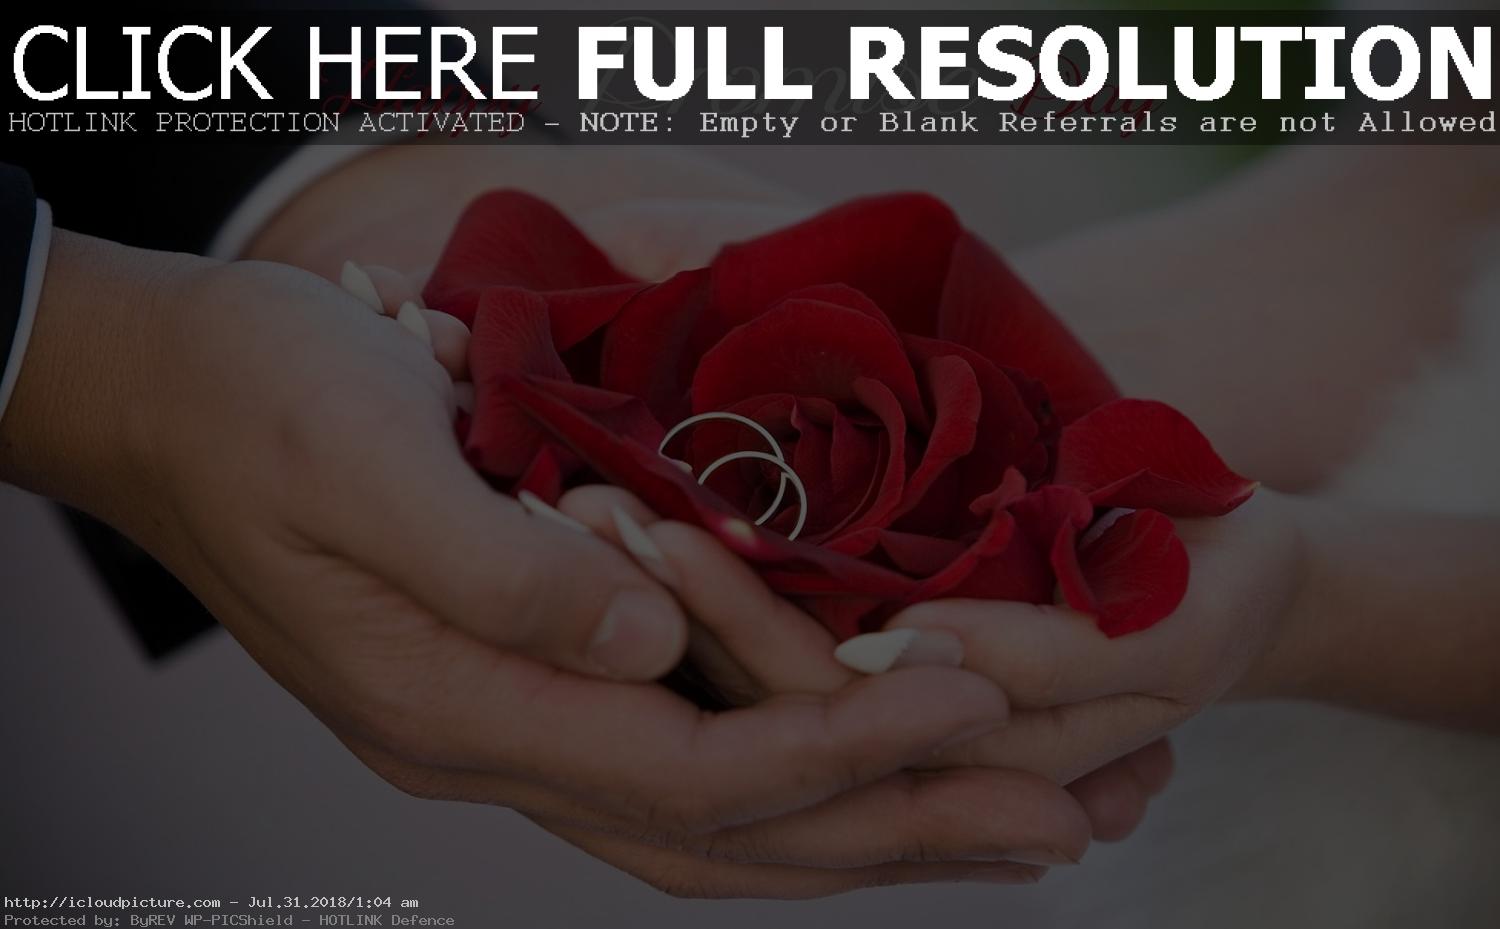 Propose Day Wallpaper Download , HD Wallpaper & Backgrounds